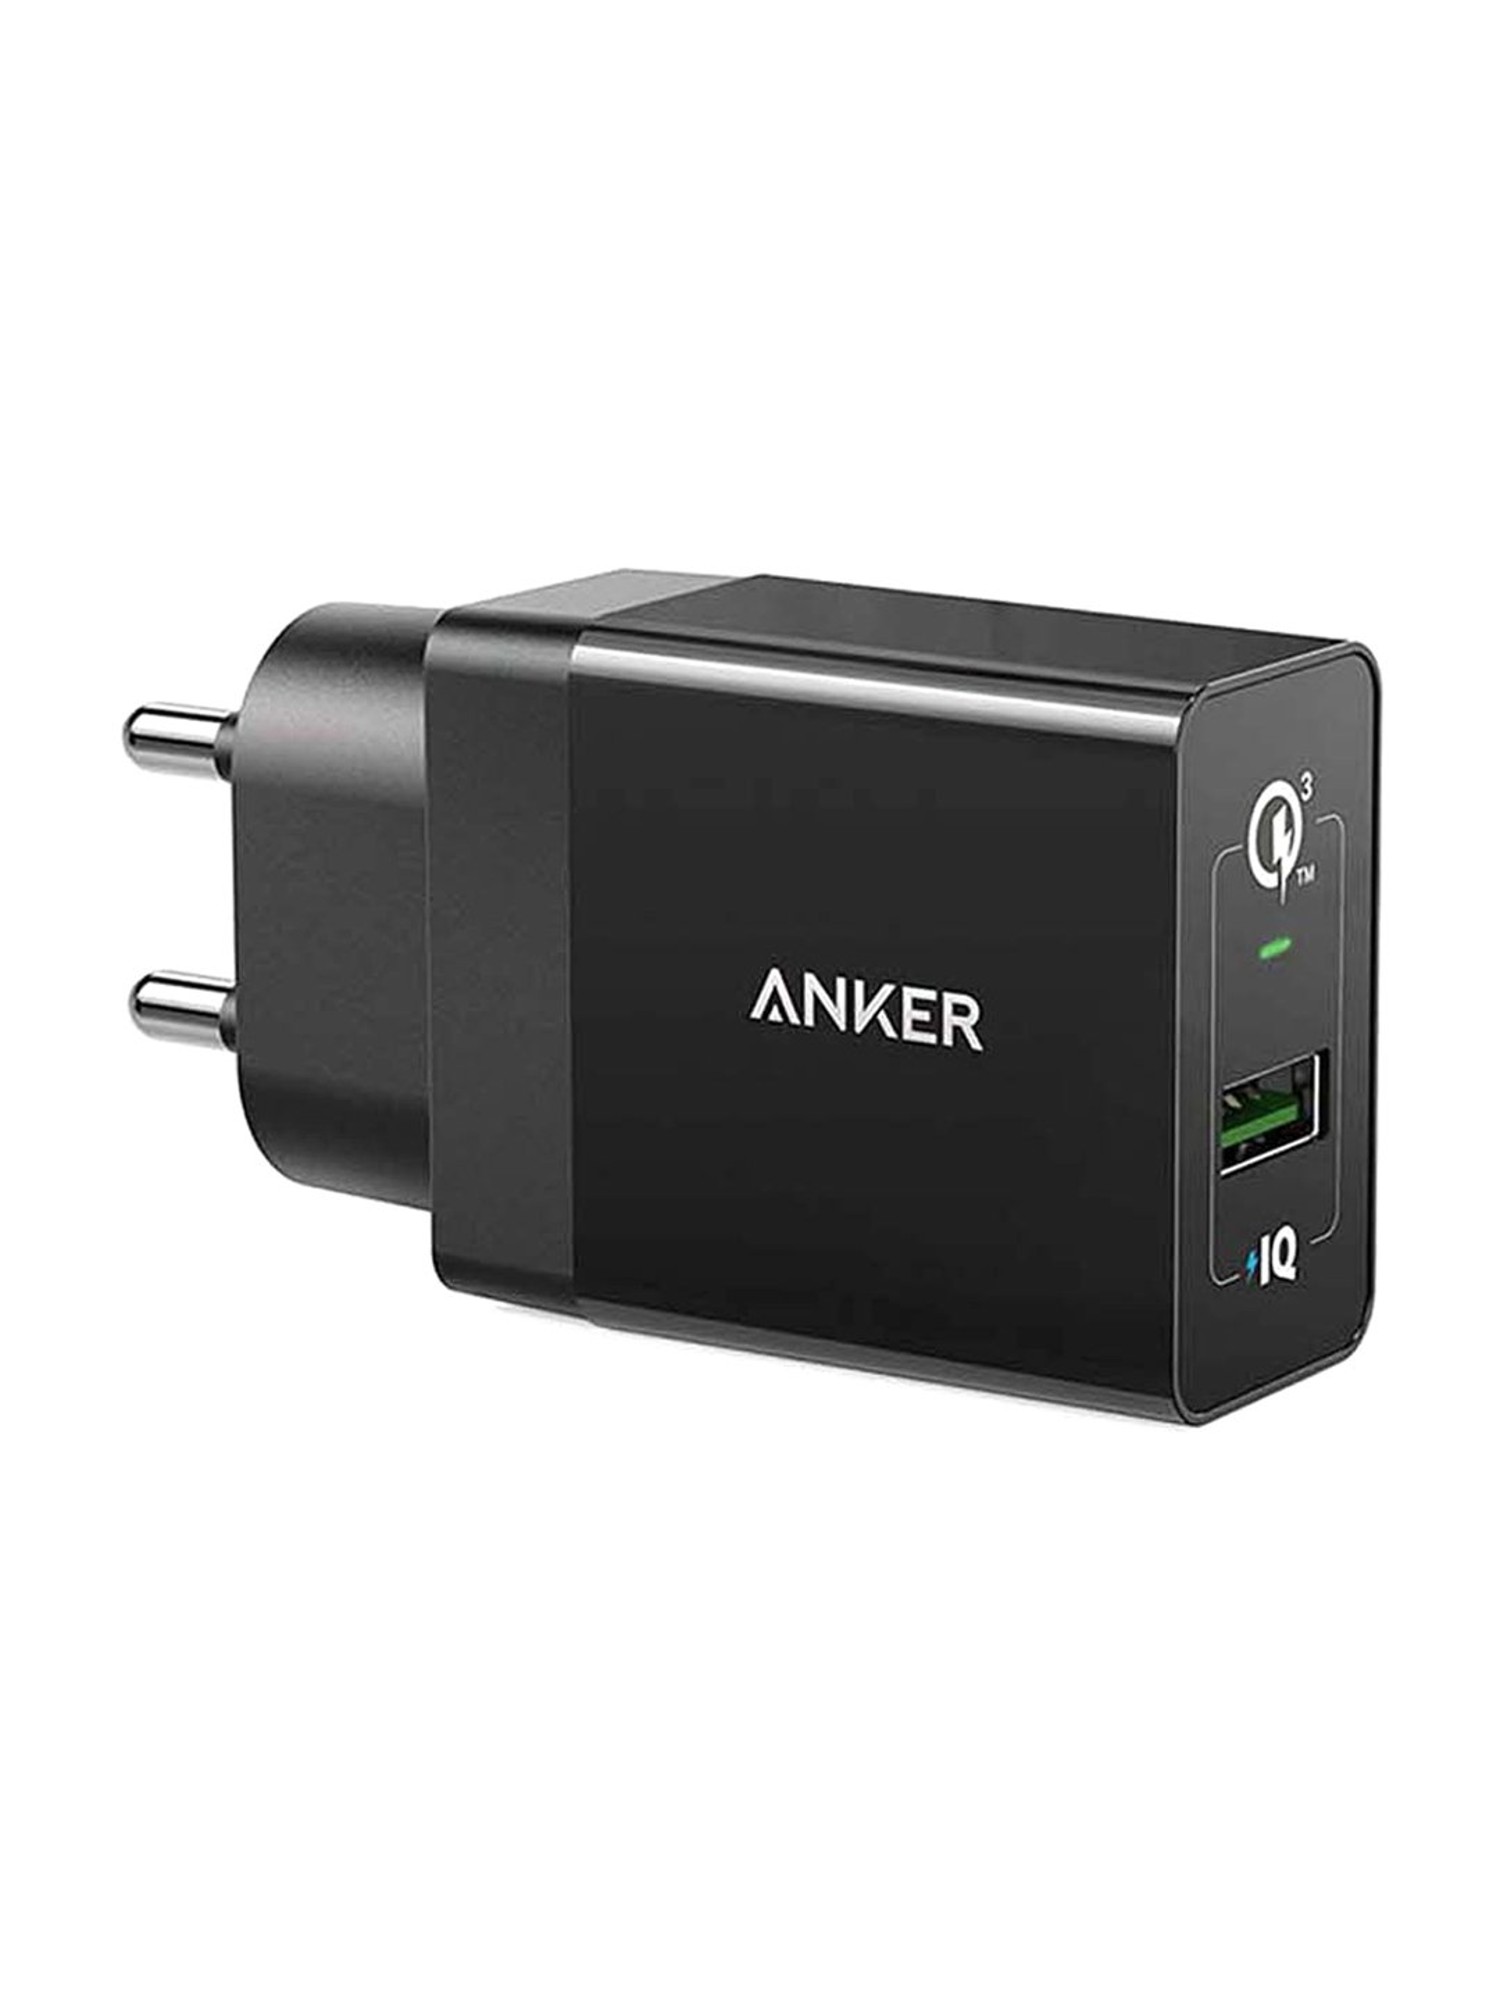 Buy Anker Powerport Plus A2013Y11 Qualcomm 3.0 USB Wall Adapter Online At  Best Price @ Tata CLiQ